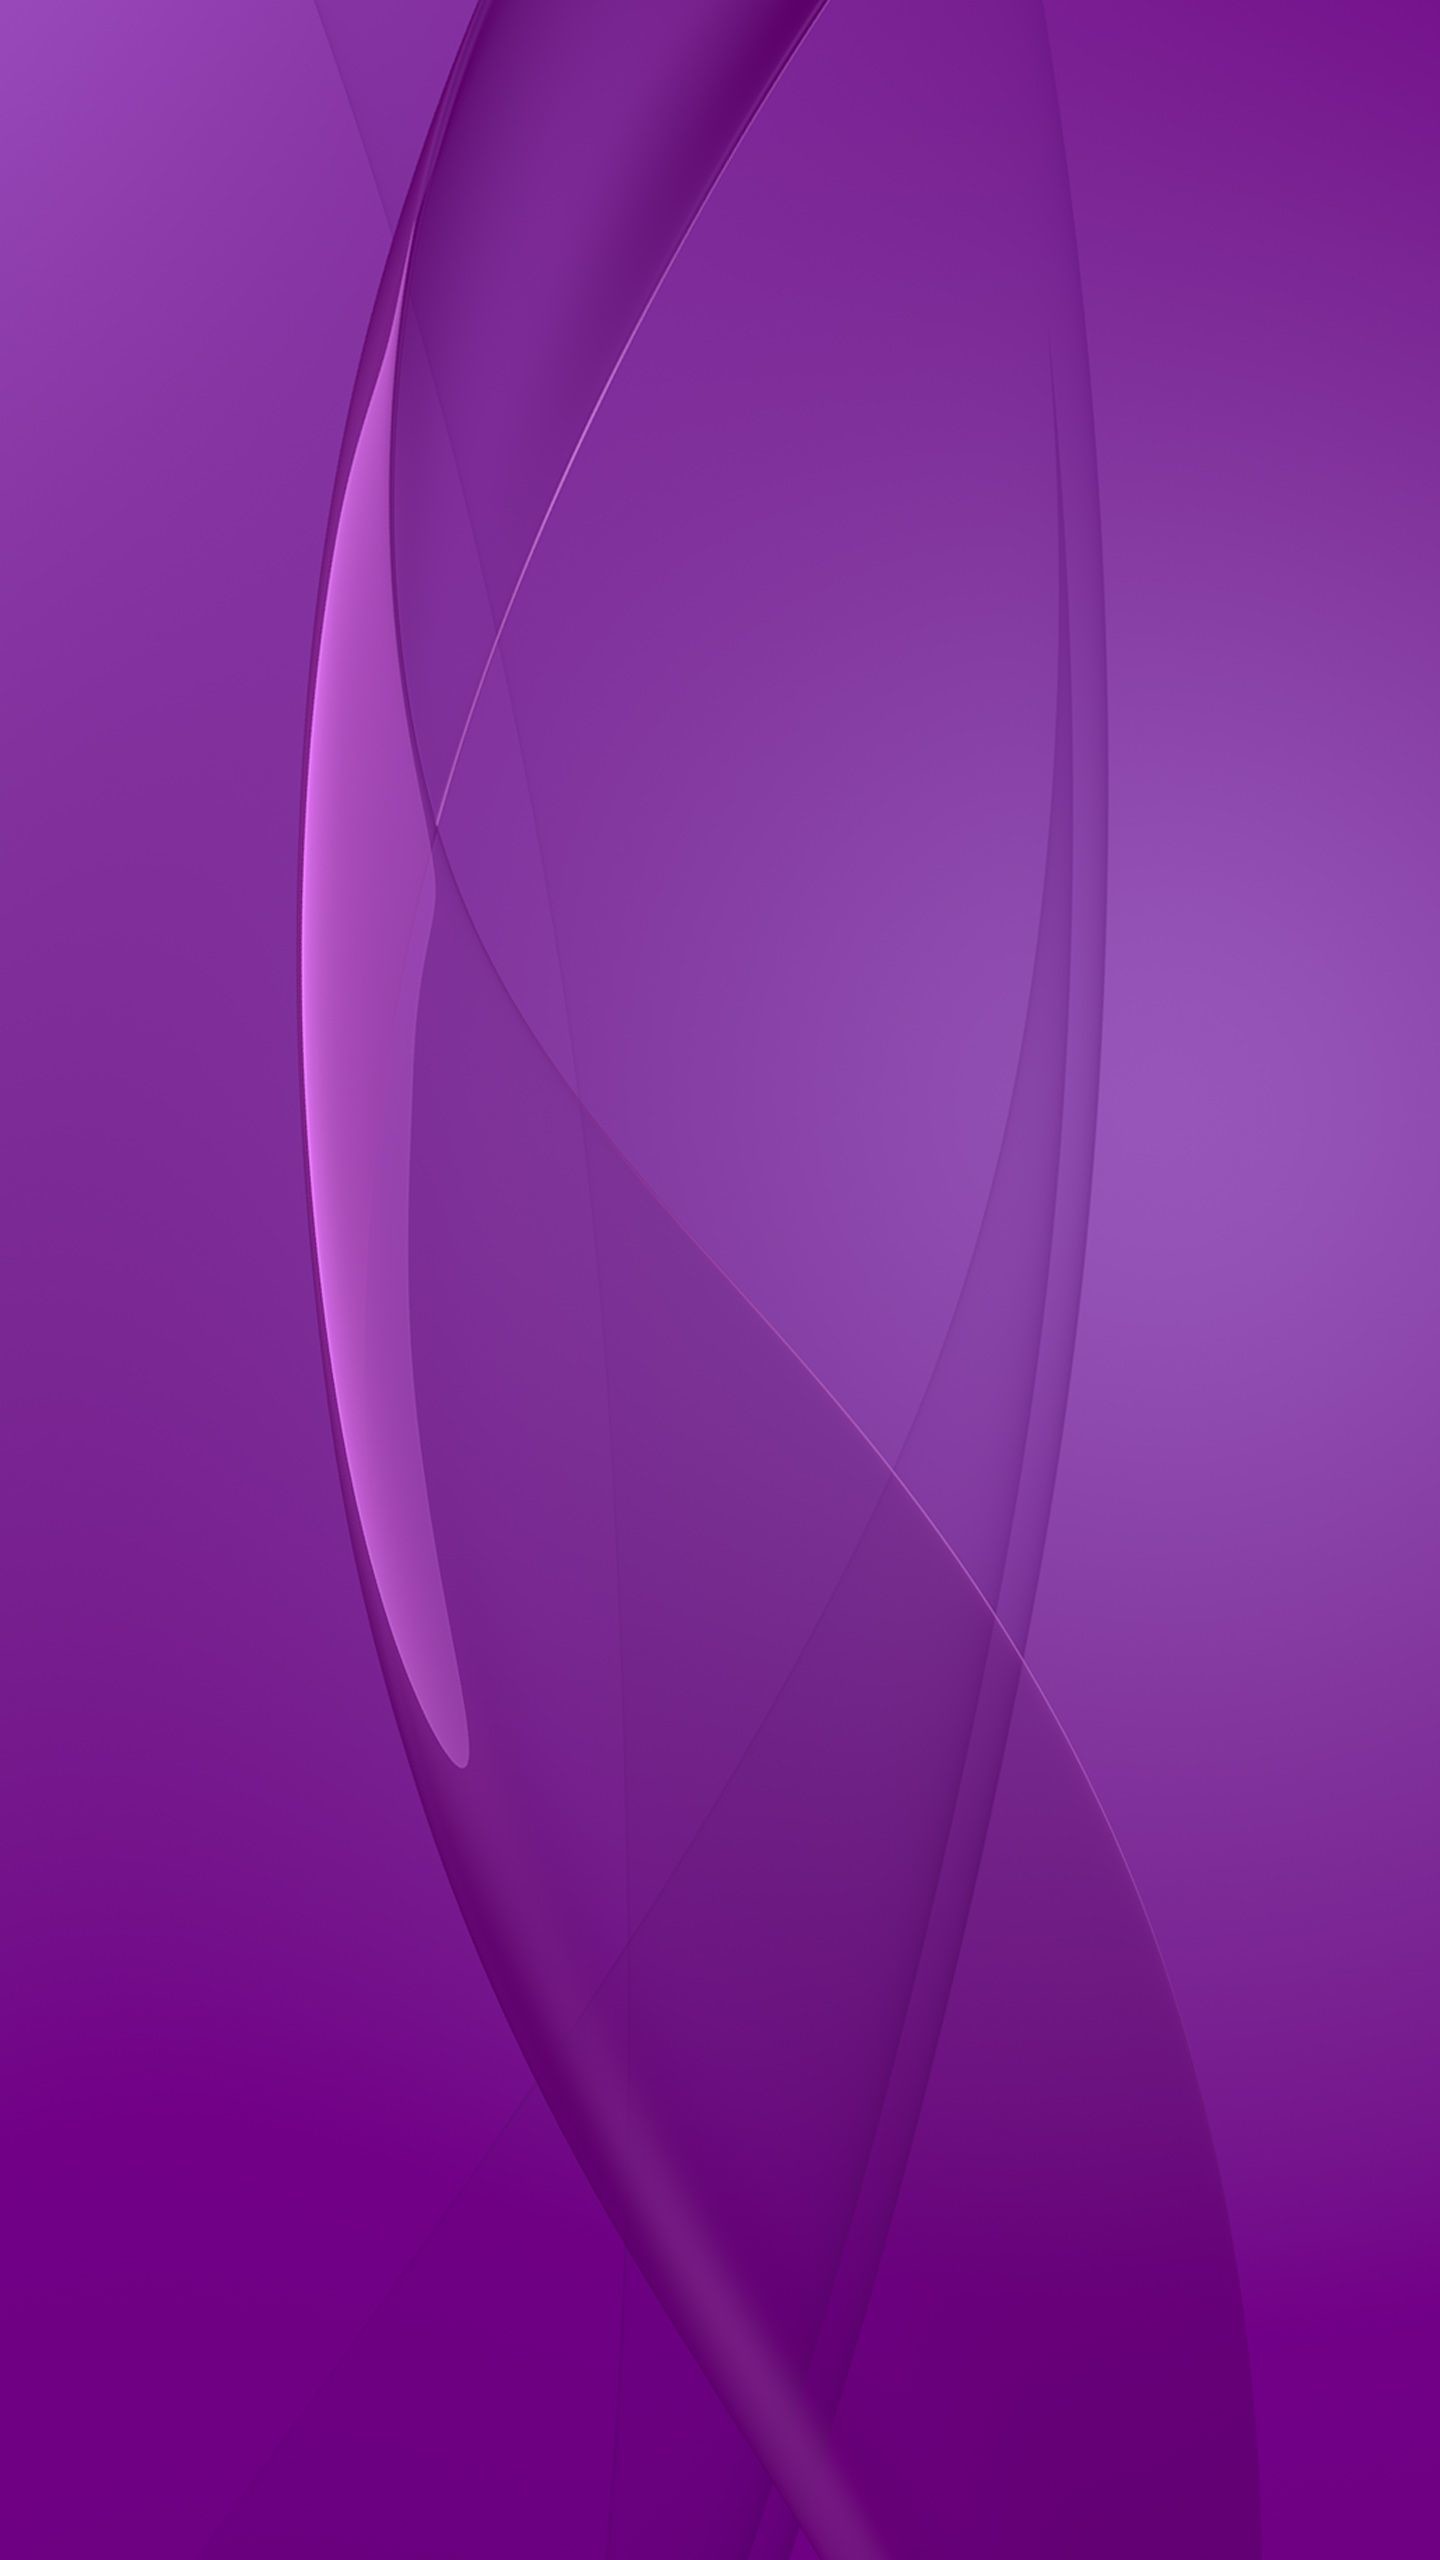 1440x2560 Purple Abstract Mobile Wallpaper http://wallpapers-and-backgrounds.net/